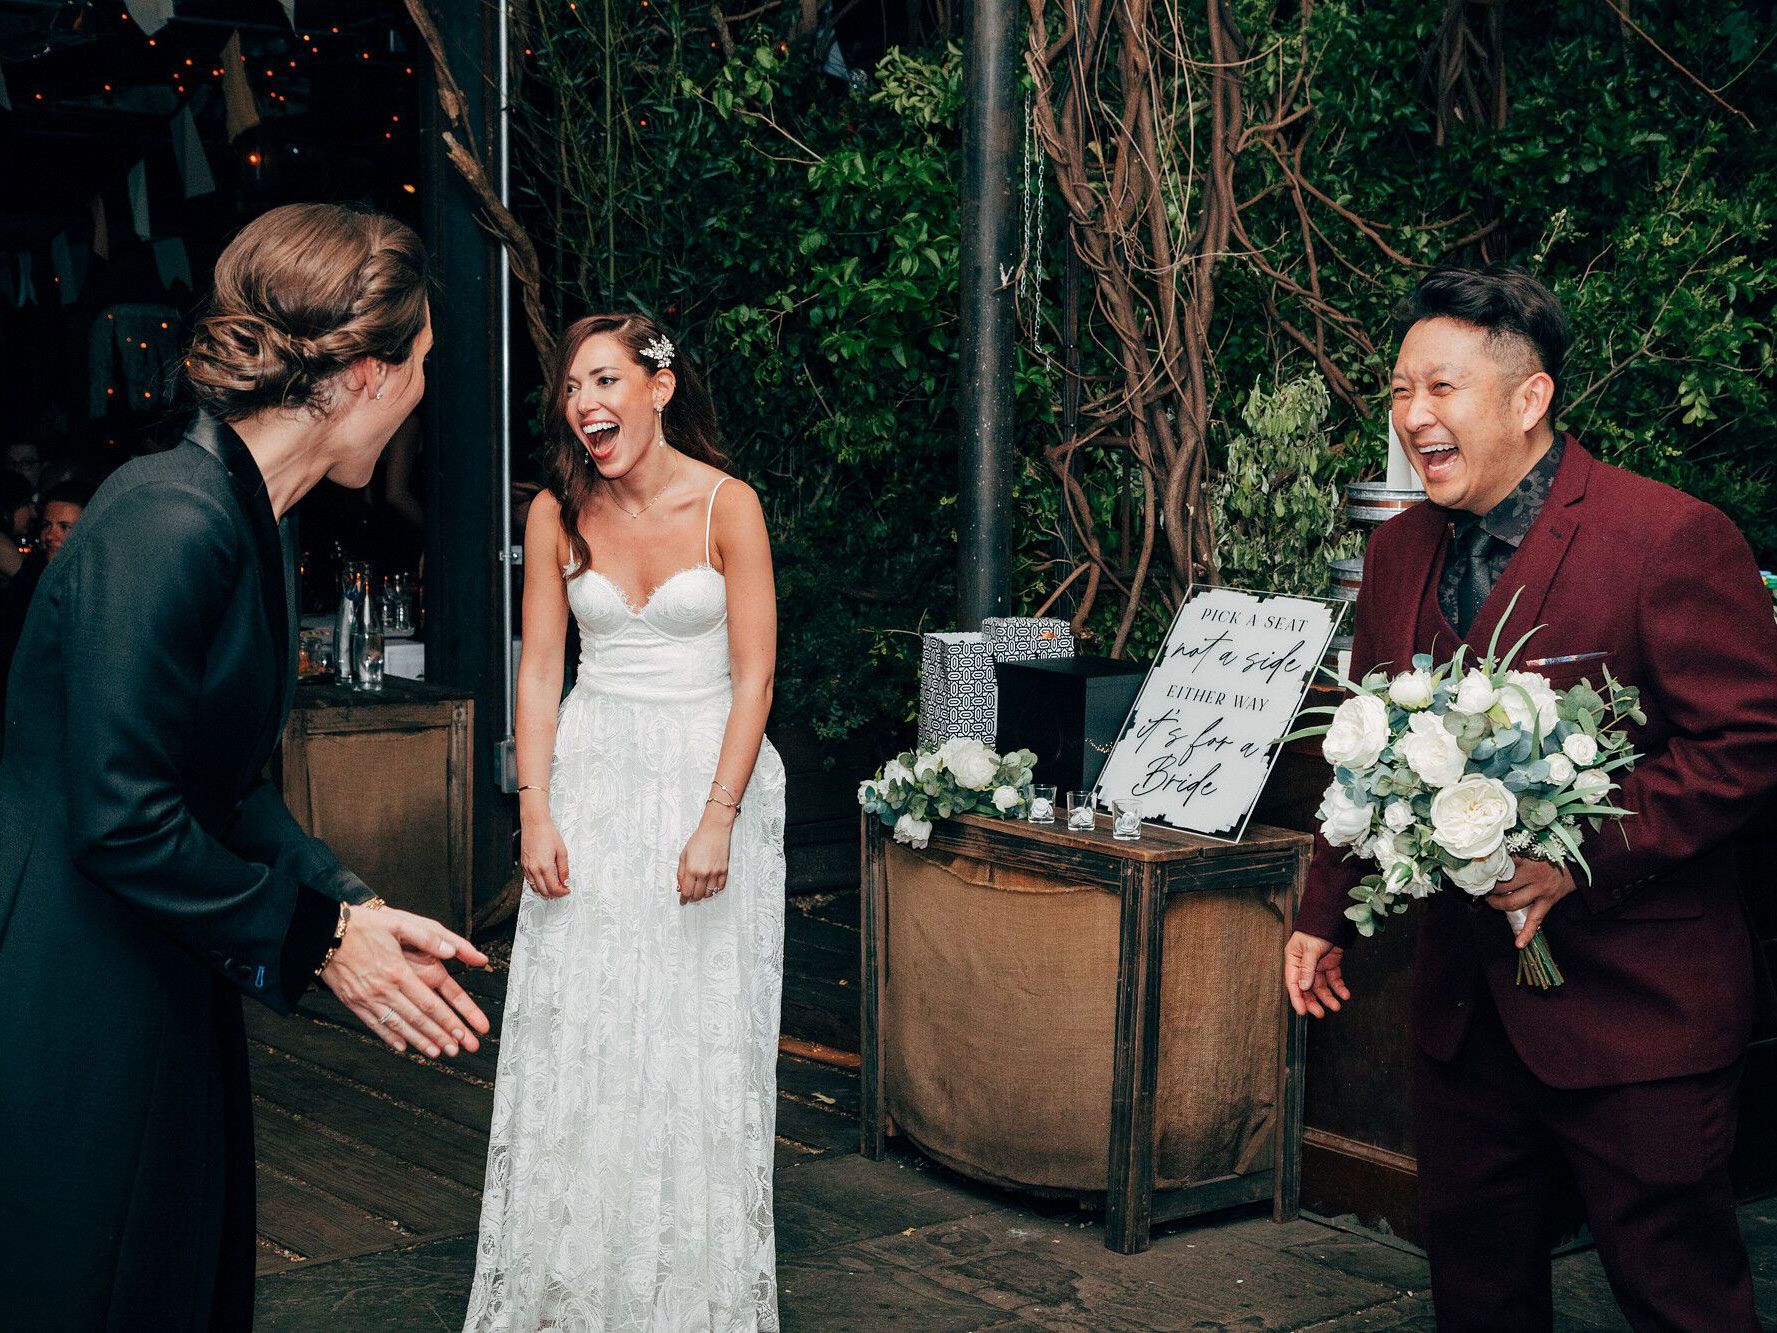 Photo from wedding ceremony with bride and wedding planner laughing